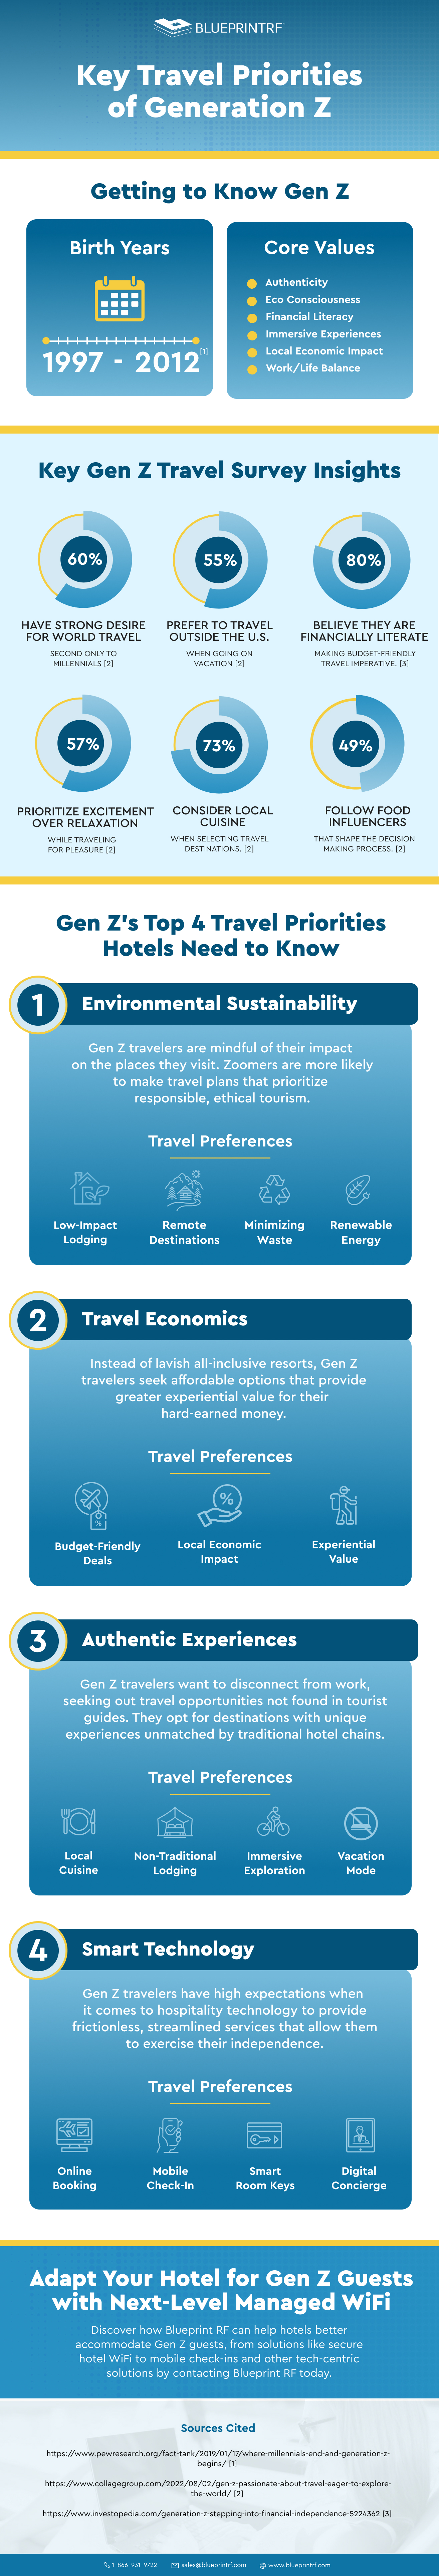 Gen Z travel trends and habits infographic